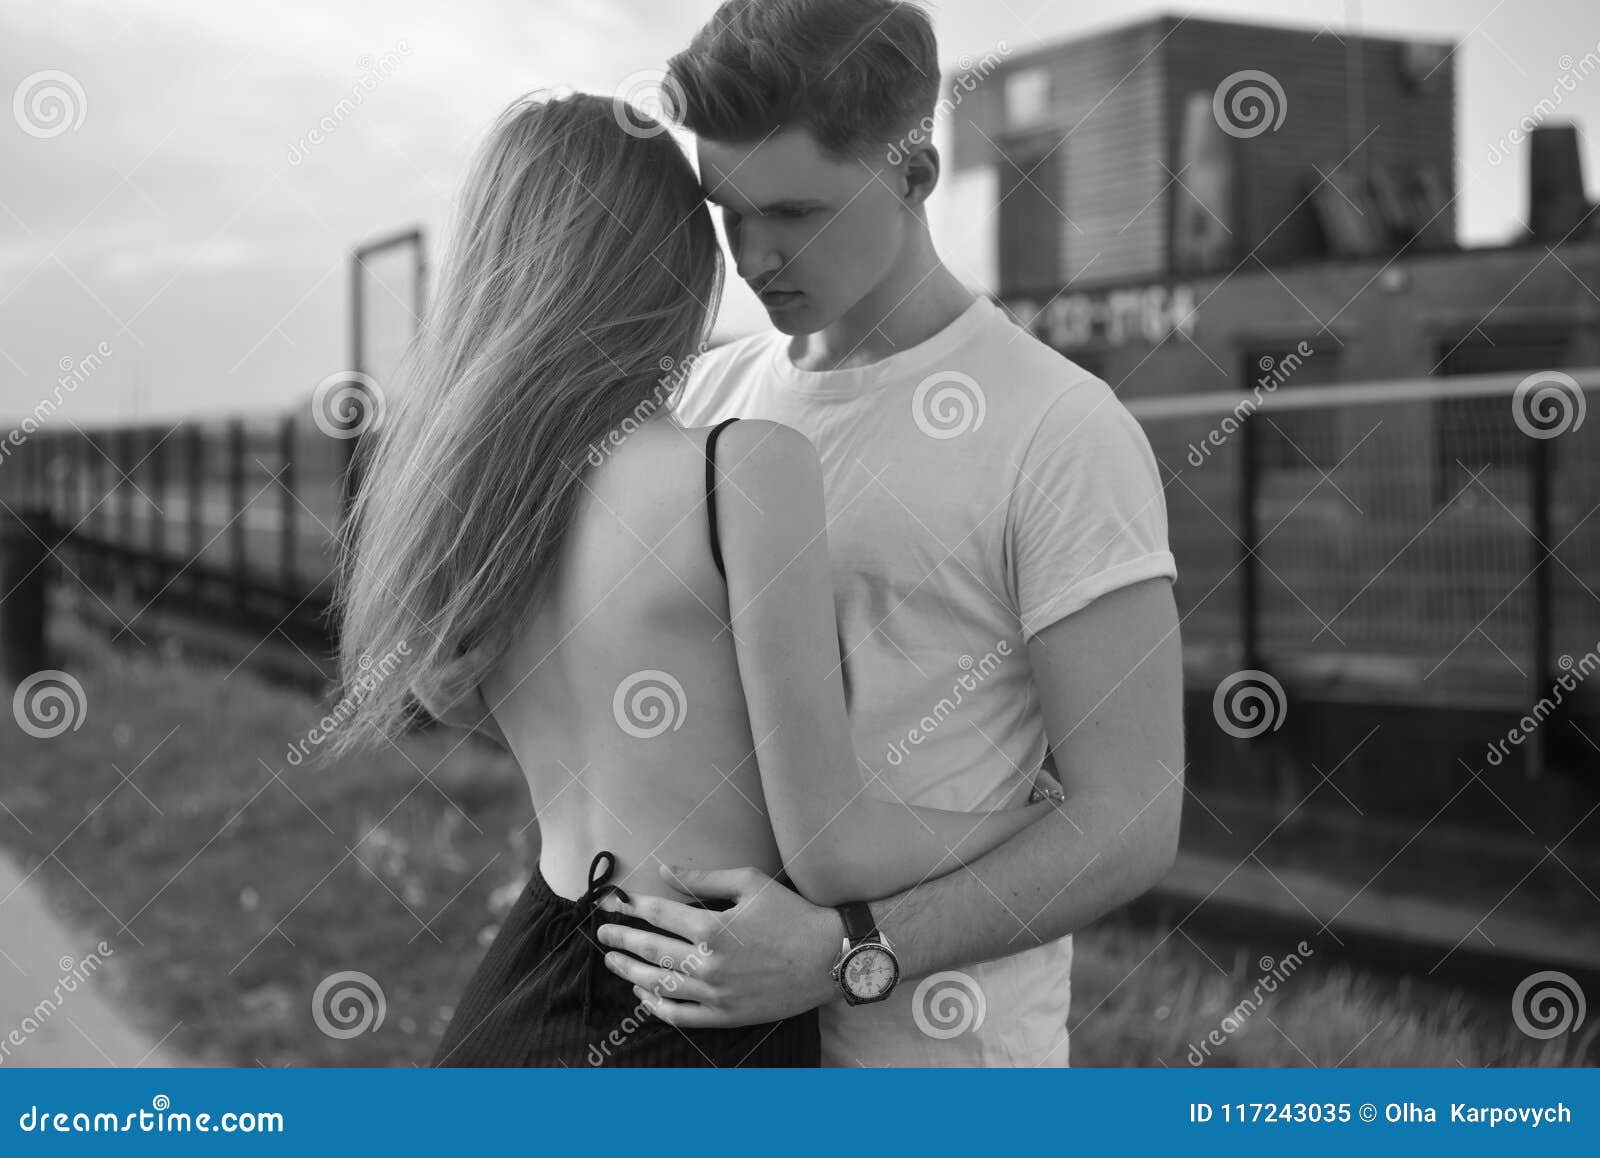 Close-up of Young Romantic Couple is Kissing and Enjoying the Company of Each Other in Black and White